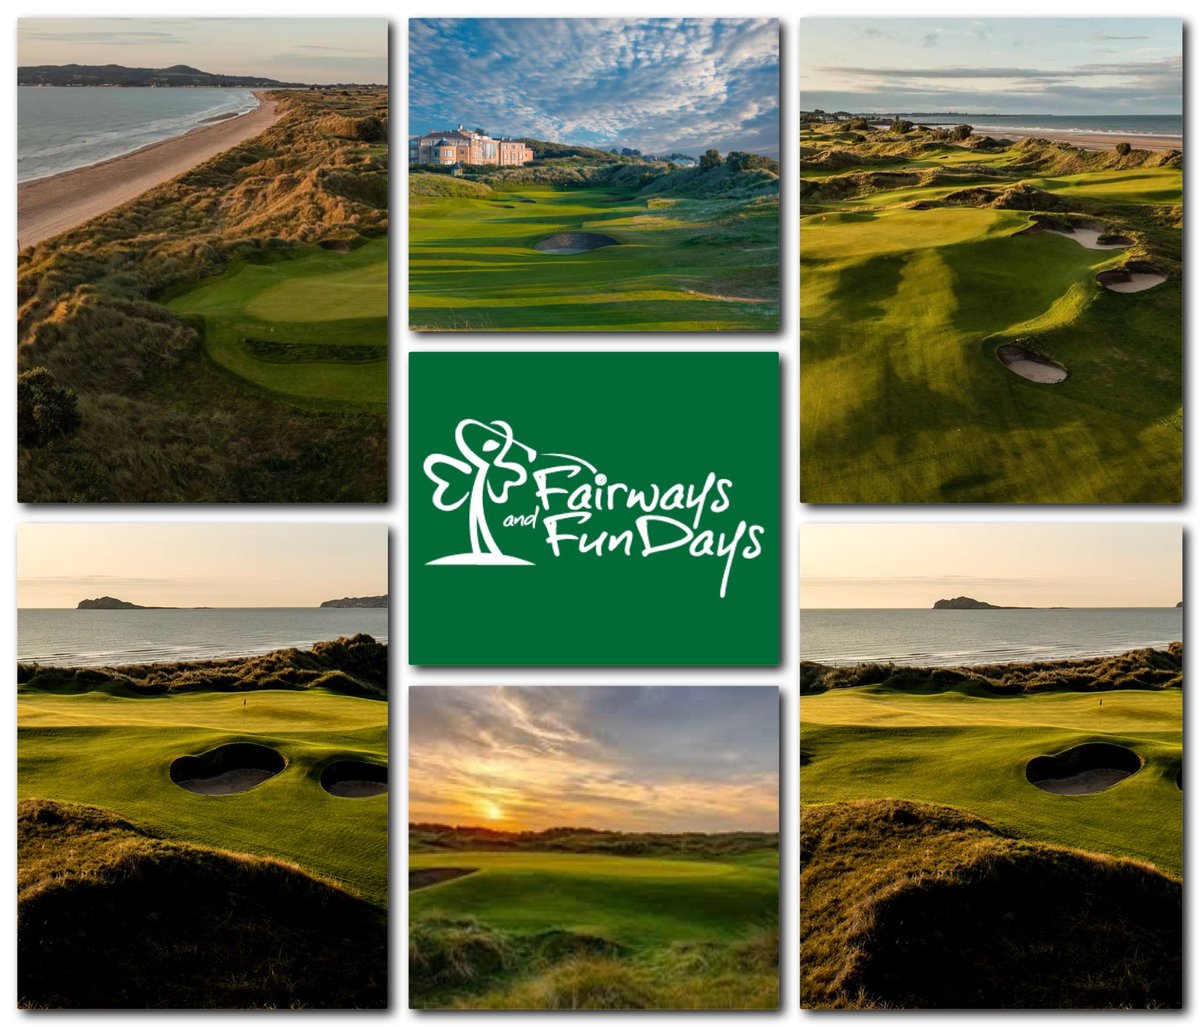 Welcome to the recently redesigned @portmarnockrjgl , located in Portmarnock, County Dublin. Formerly the residence of the Jameson Family, this championship Links course offers a remarkable challenge for enthusiasts of true links golf! #jamesonlinks #FairwaysAndFundays